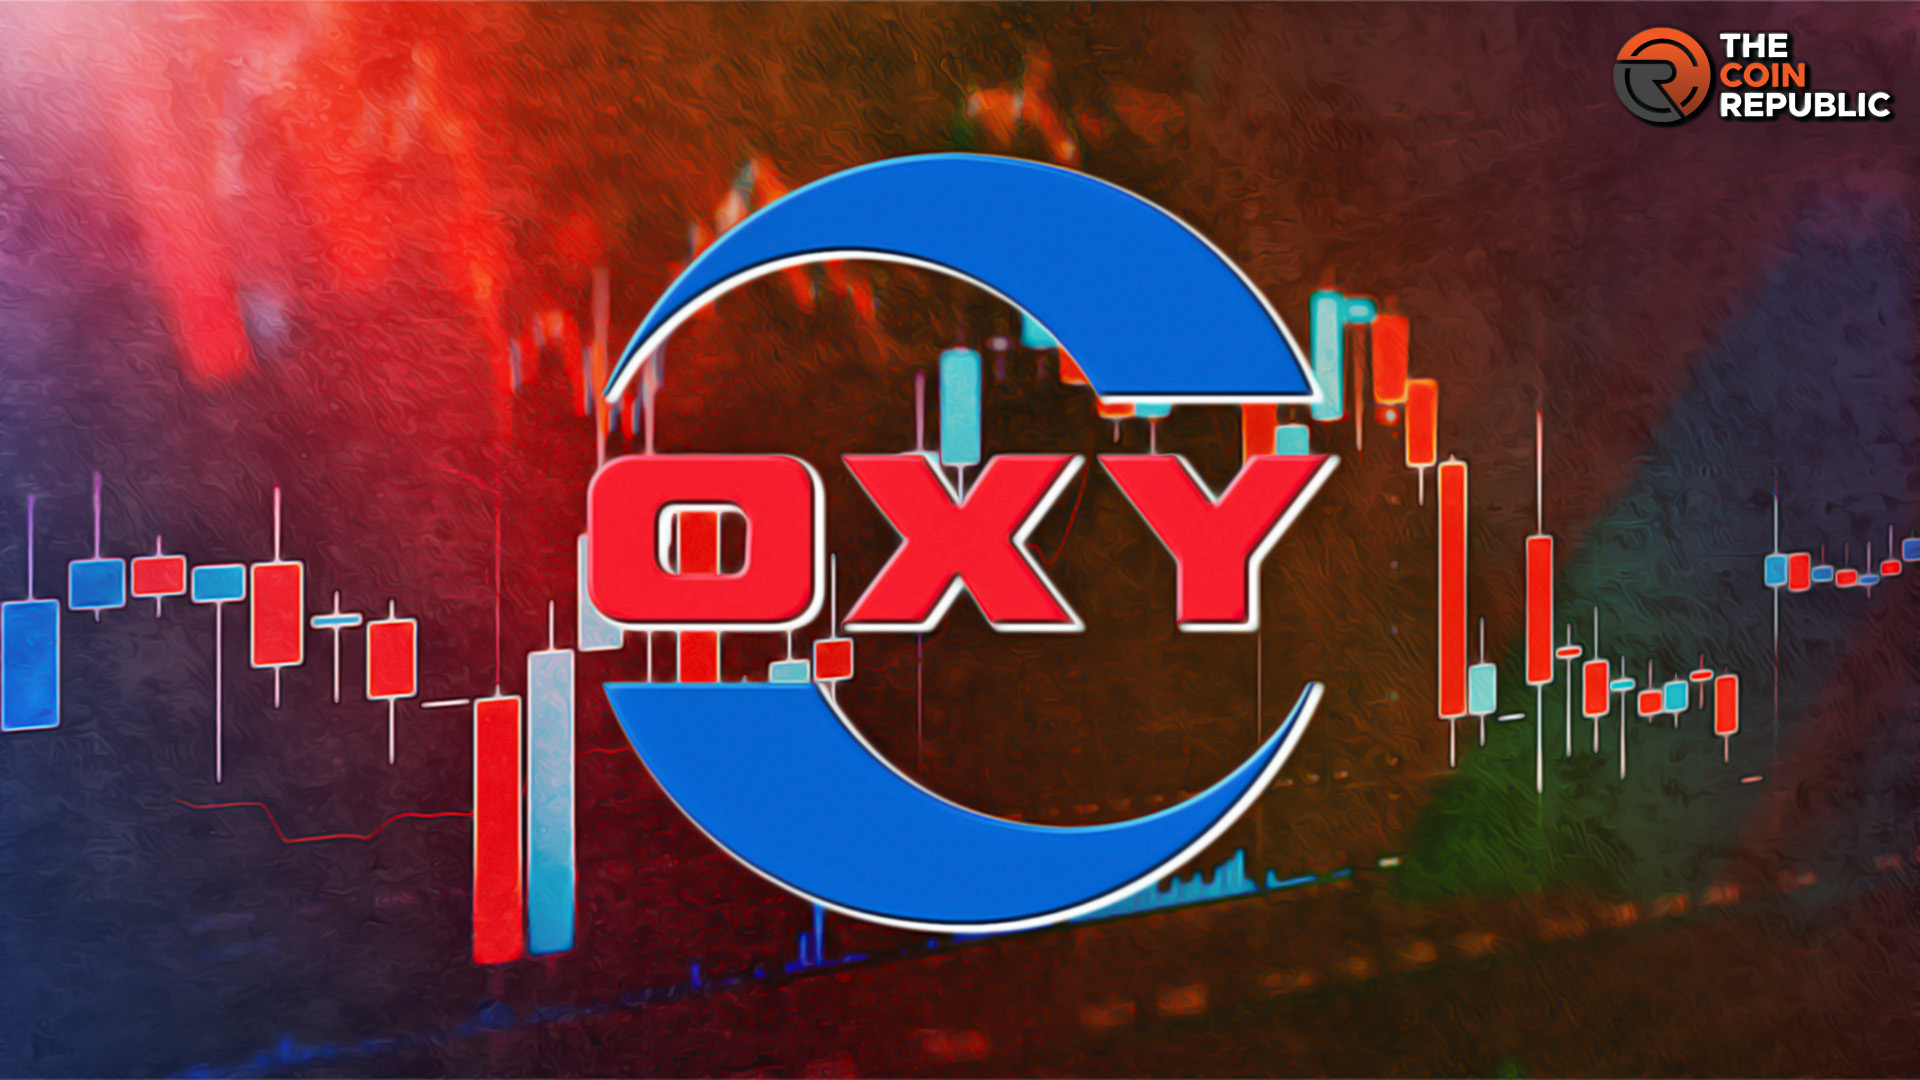 Occidental Petroleum Corp Stock Sheds 6%; More Bearishness Expected?